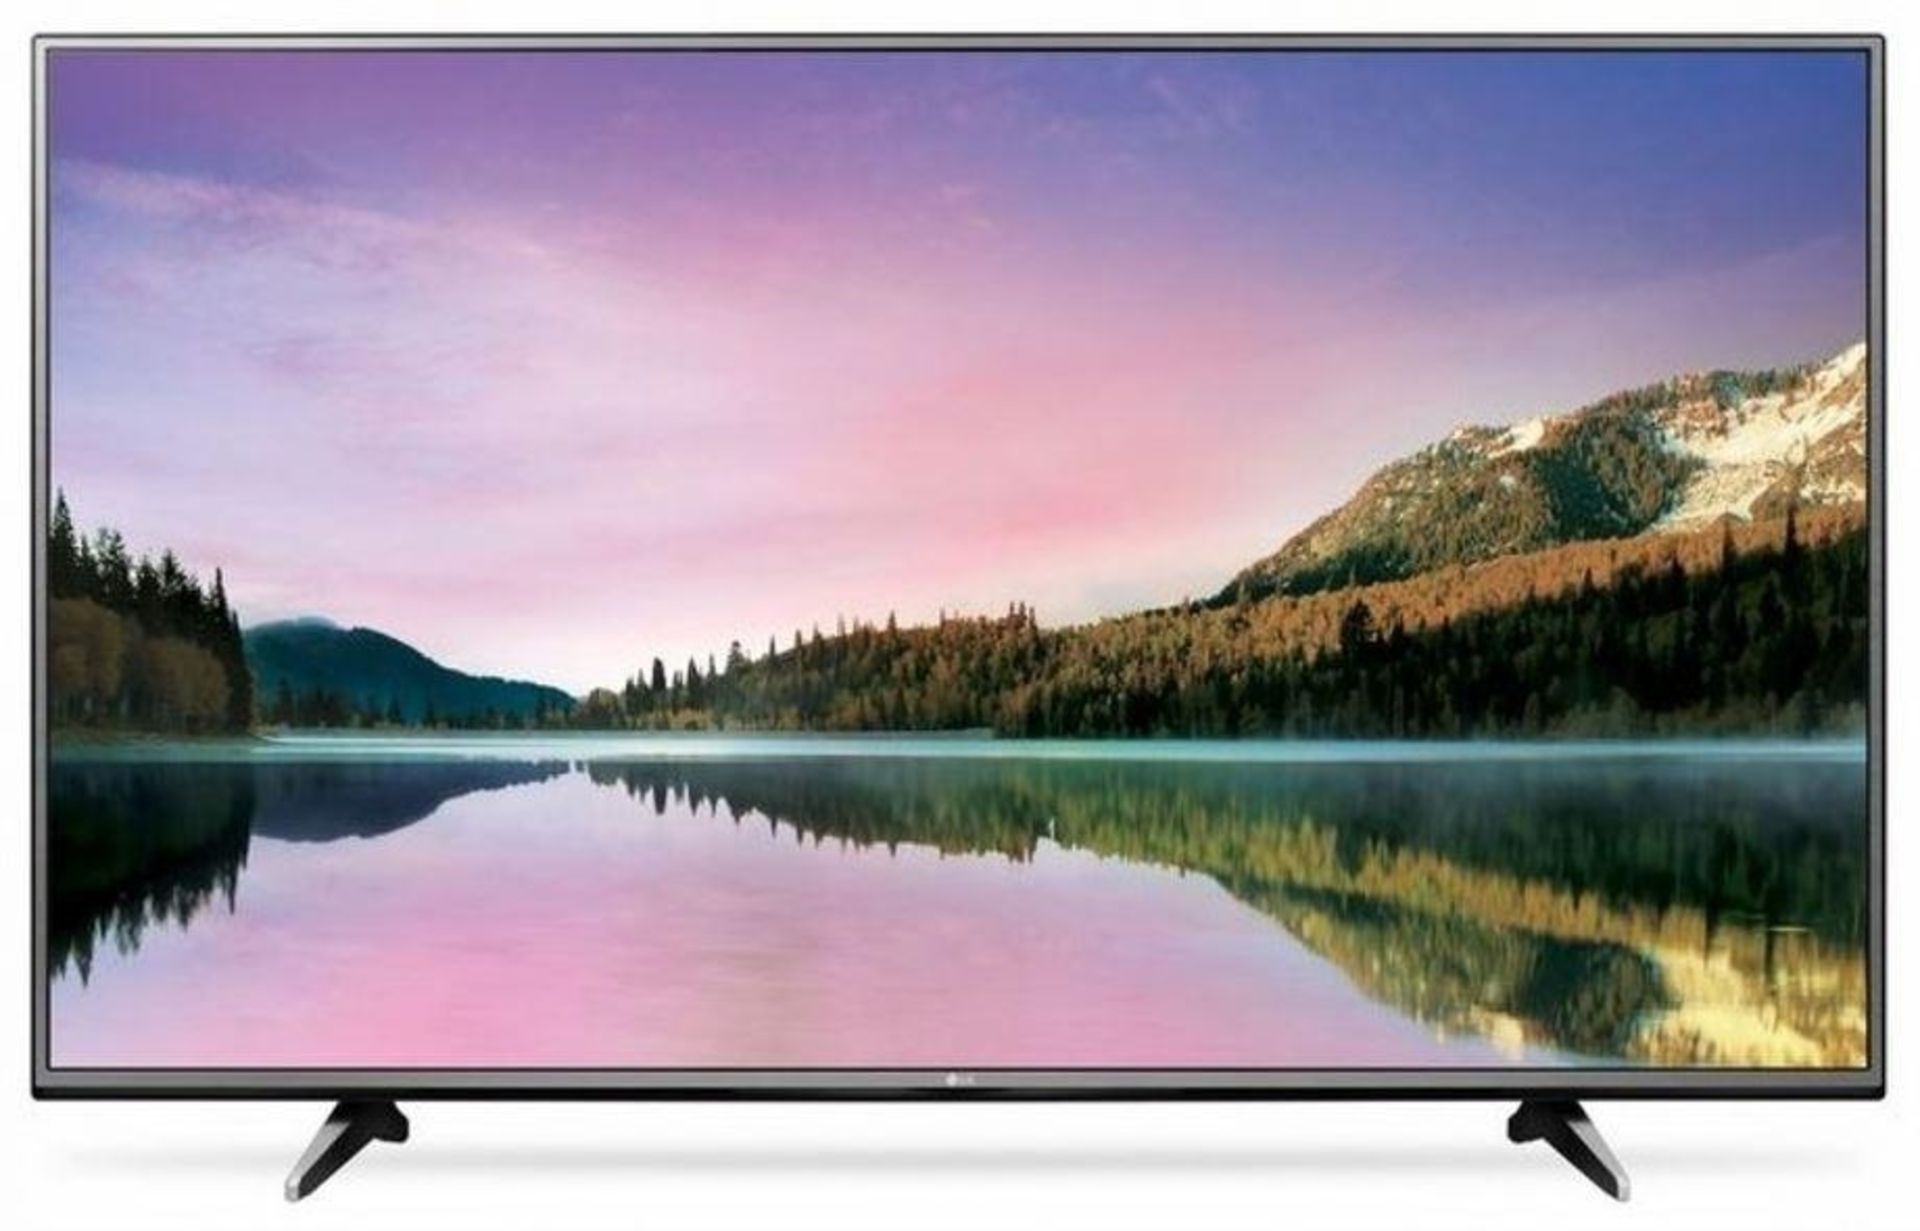 V Grade A LG 65" 4K Ultra HD Smart TV With WebOS 2.0 - WiFi Built In - 3D Colour Mapping - Slim